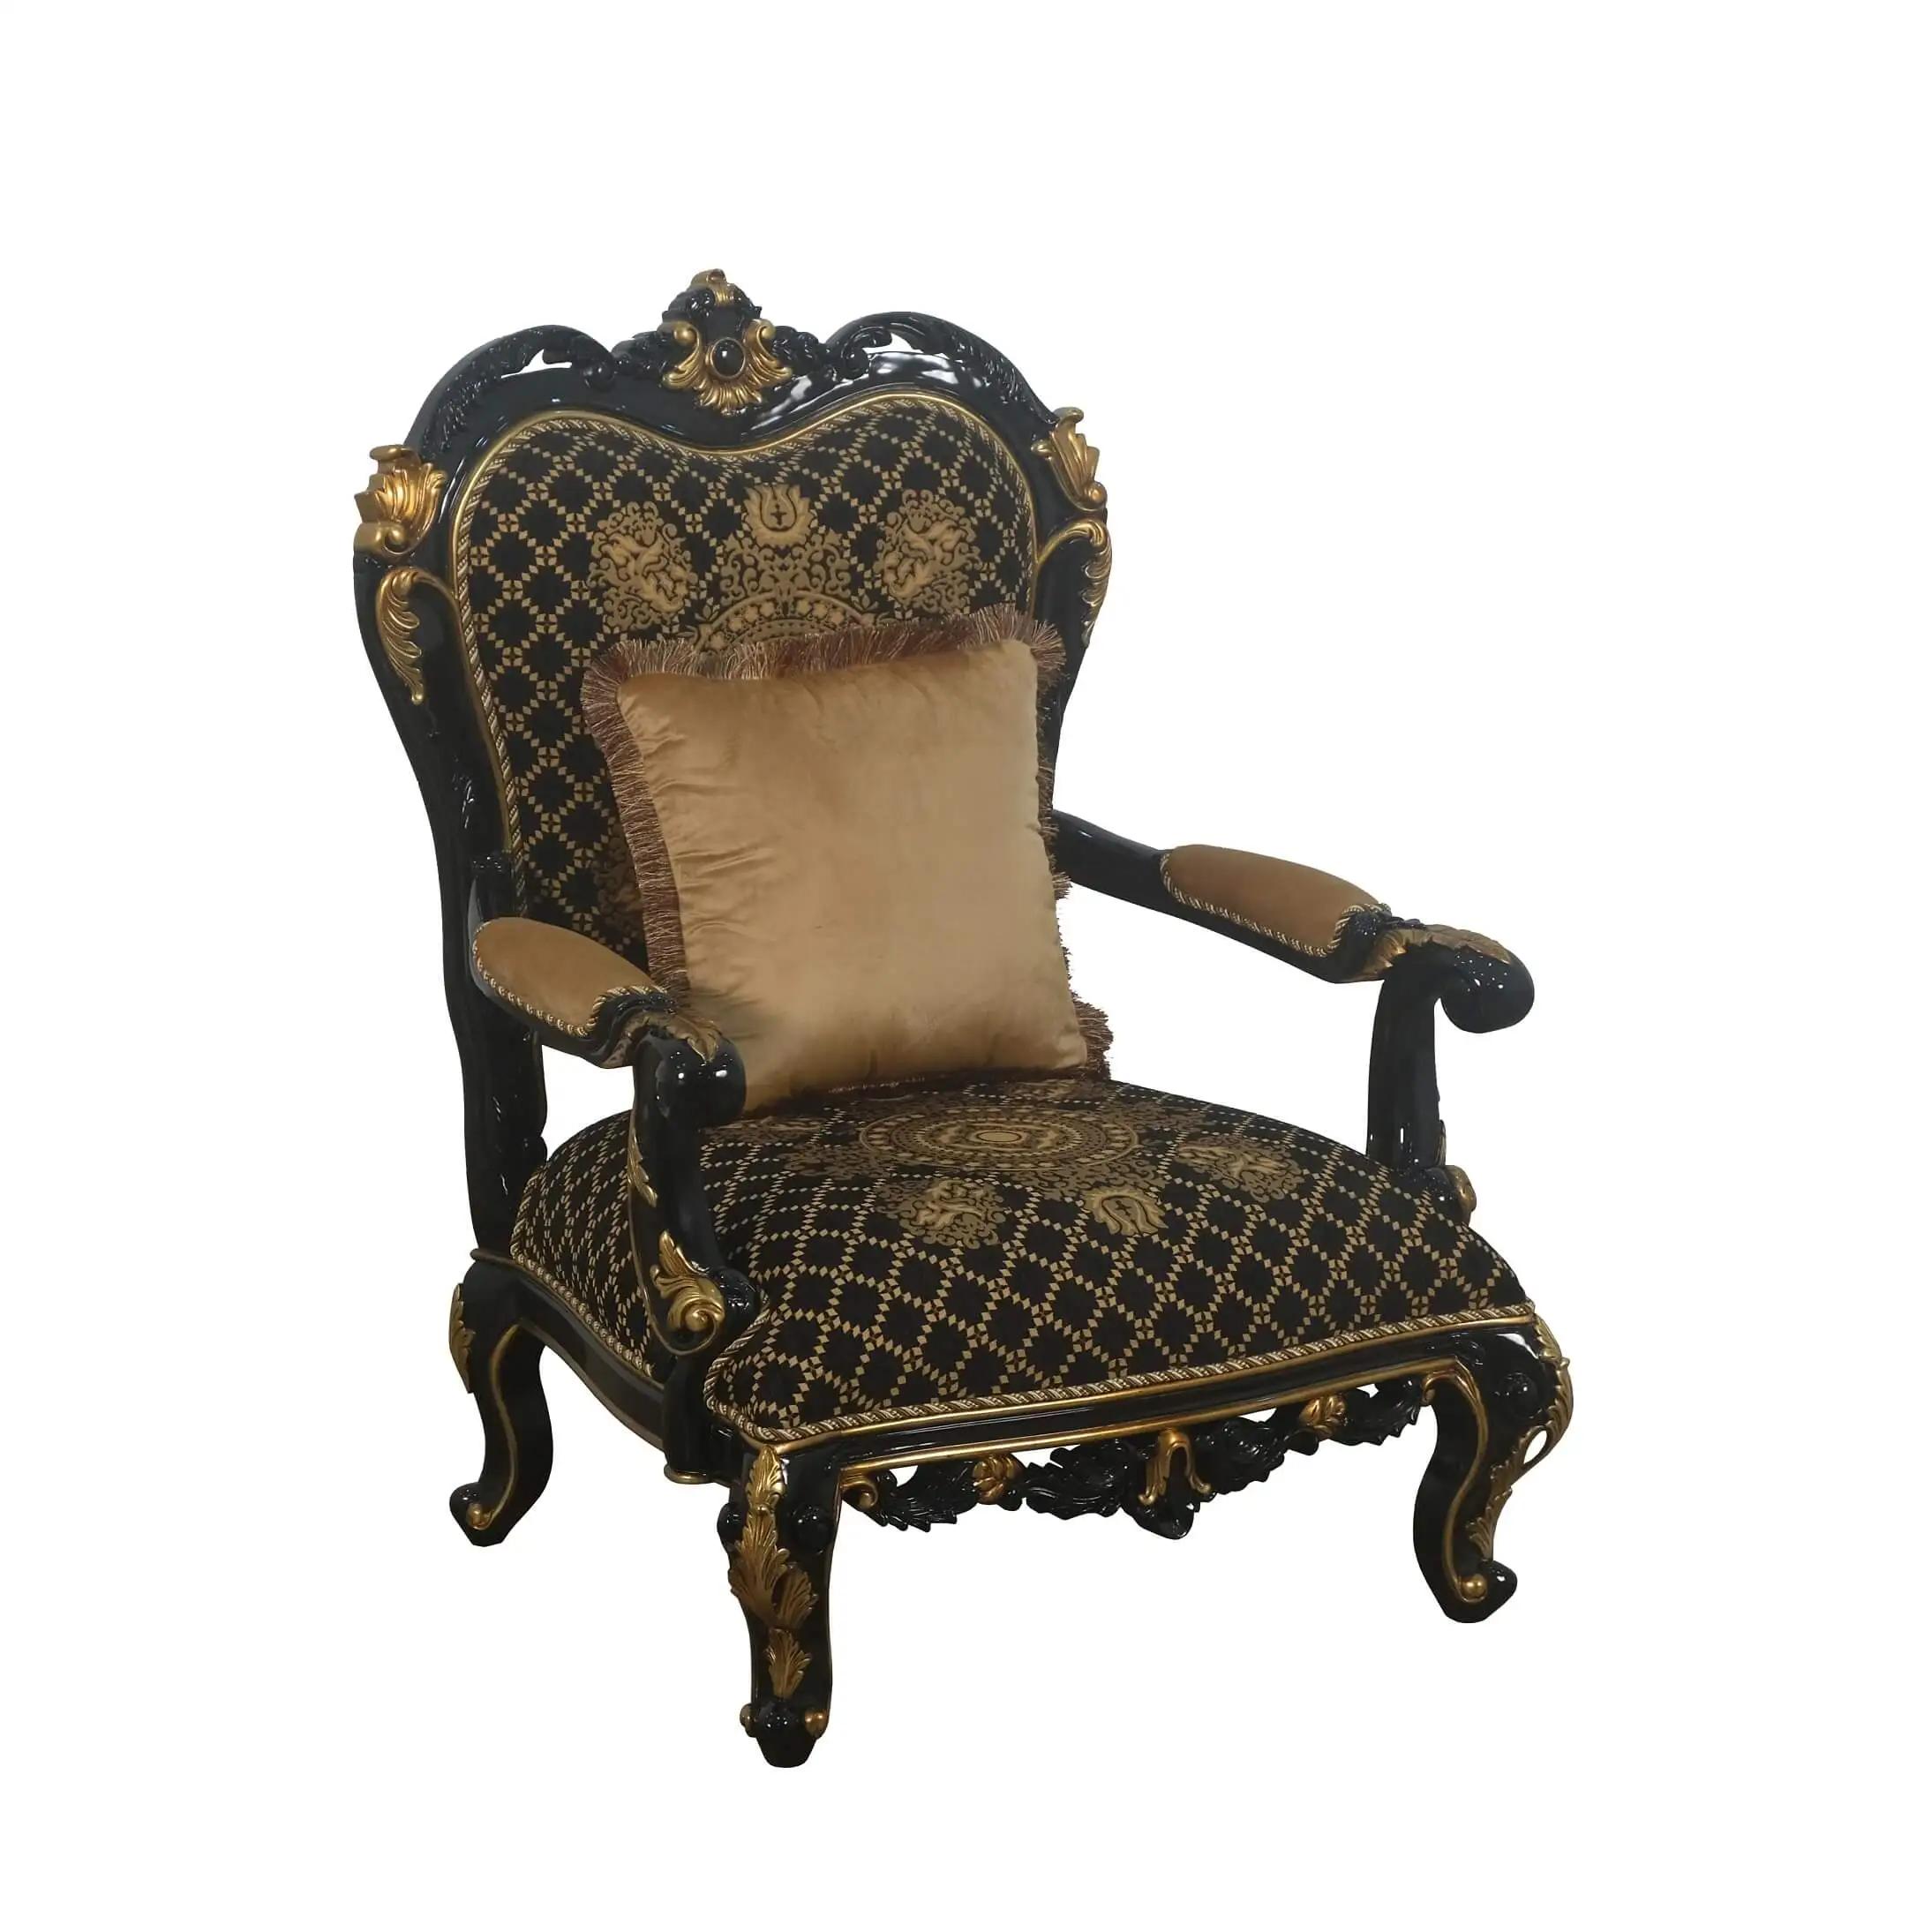 Classic, Traditional Arm Chairs ROSELLA 44696-C in Gold, Black Fabric